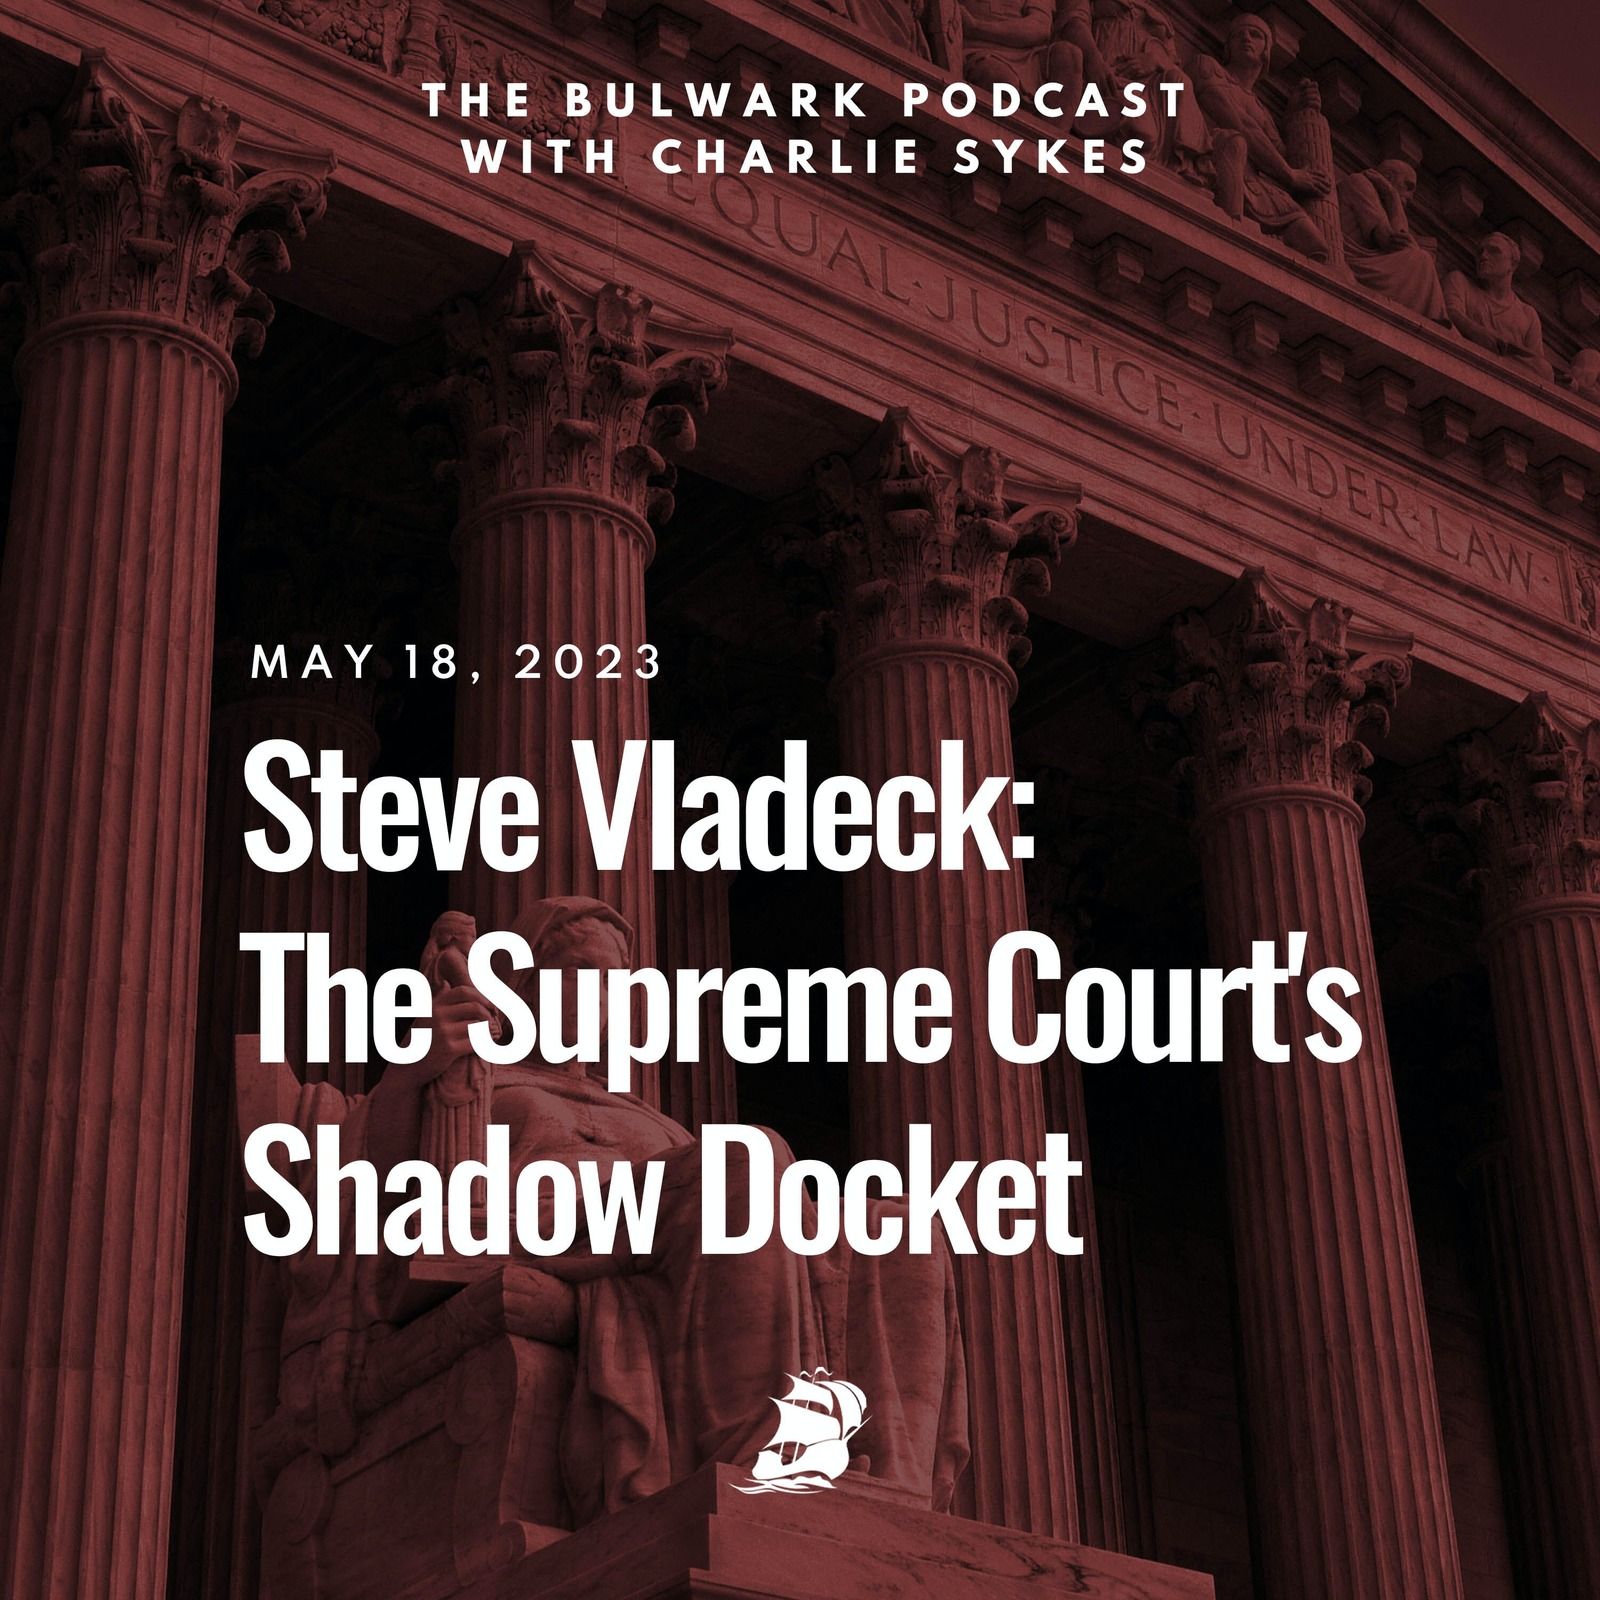 Steve Vladeck: The Supreme Court's Shadow Docket by The Bulwark Podcast